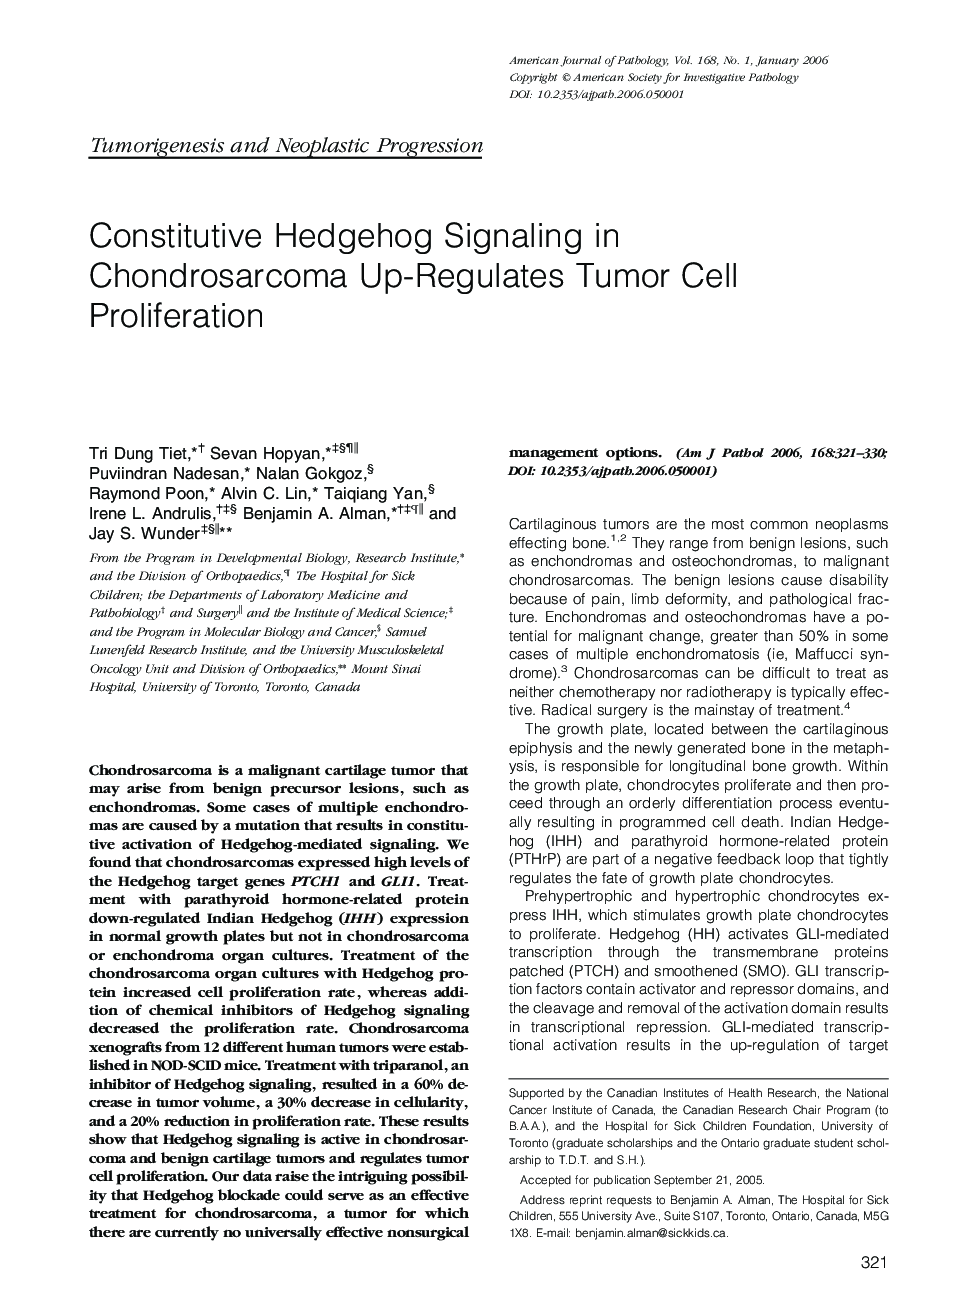 Constitutive Hedgehog Signaling in Chondrosarcoma Up-Regulates Tumor Cell Proliferation